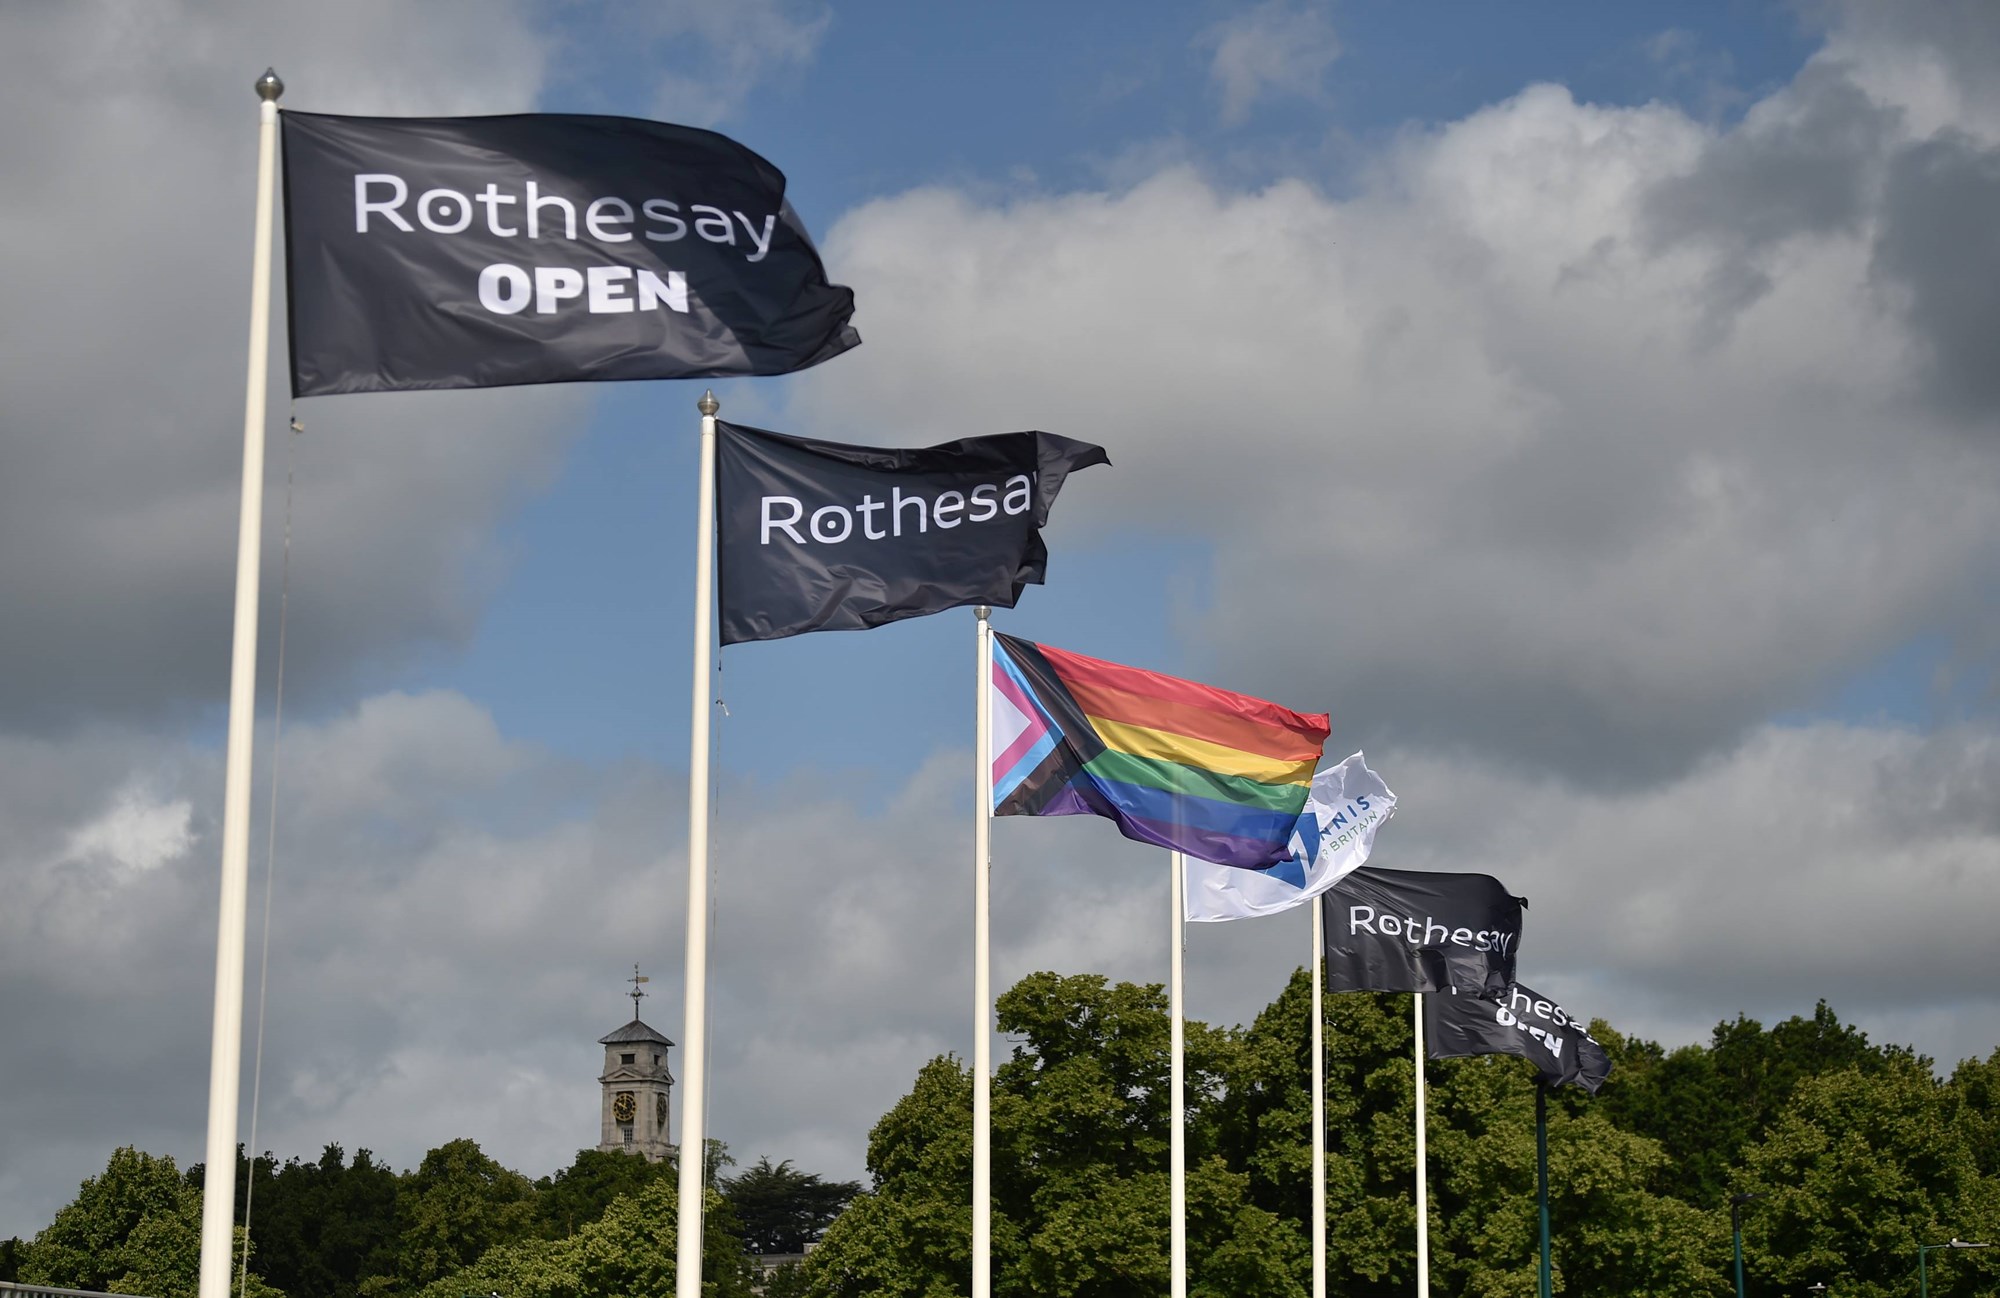 Detail view of the Rothesay and Rainbow flag during day seven of the Rothesay Open at Nottingham Tennis Centre on June 10, 2022 in Nottingham, England.